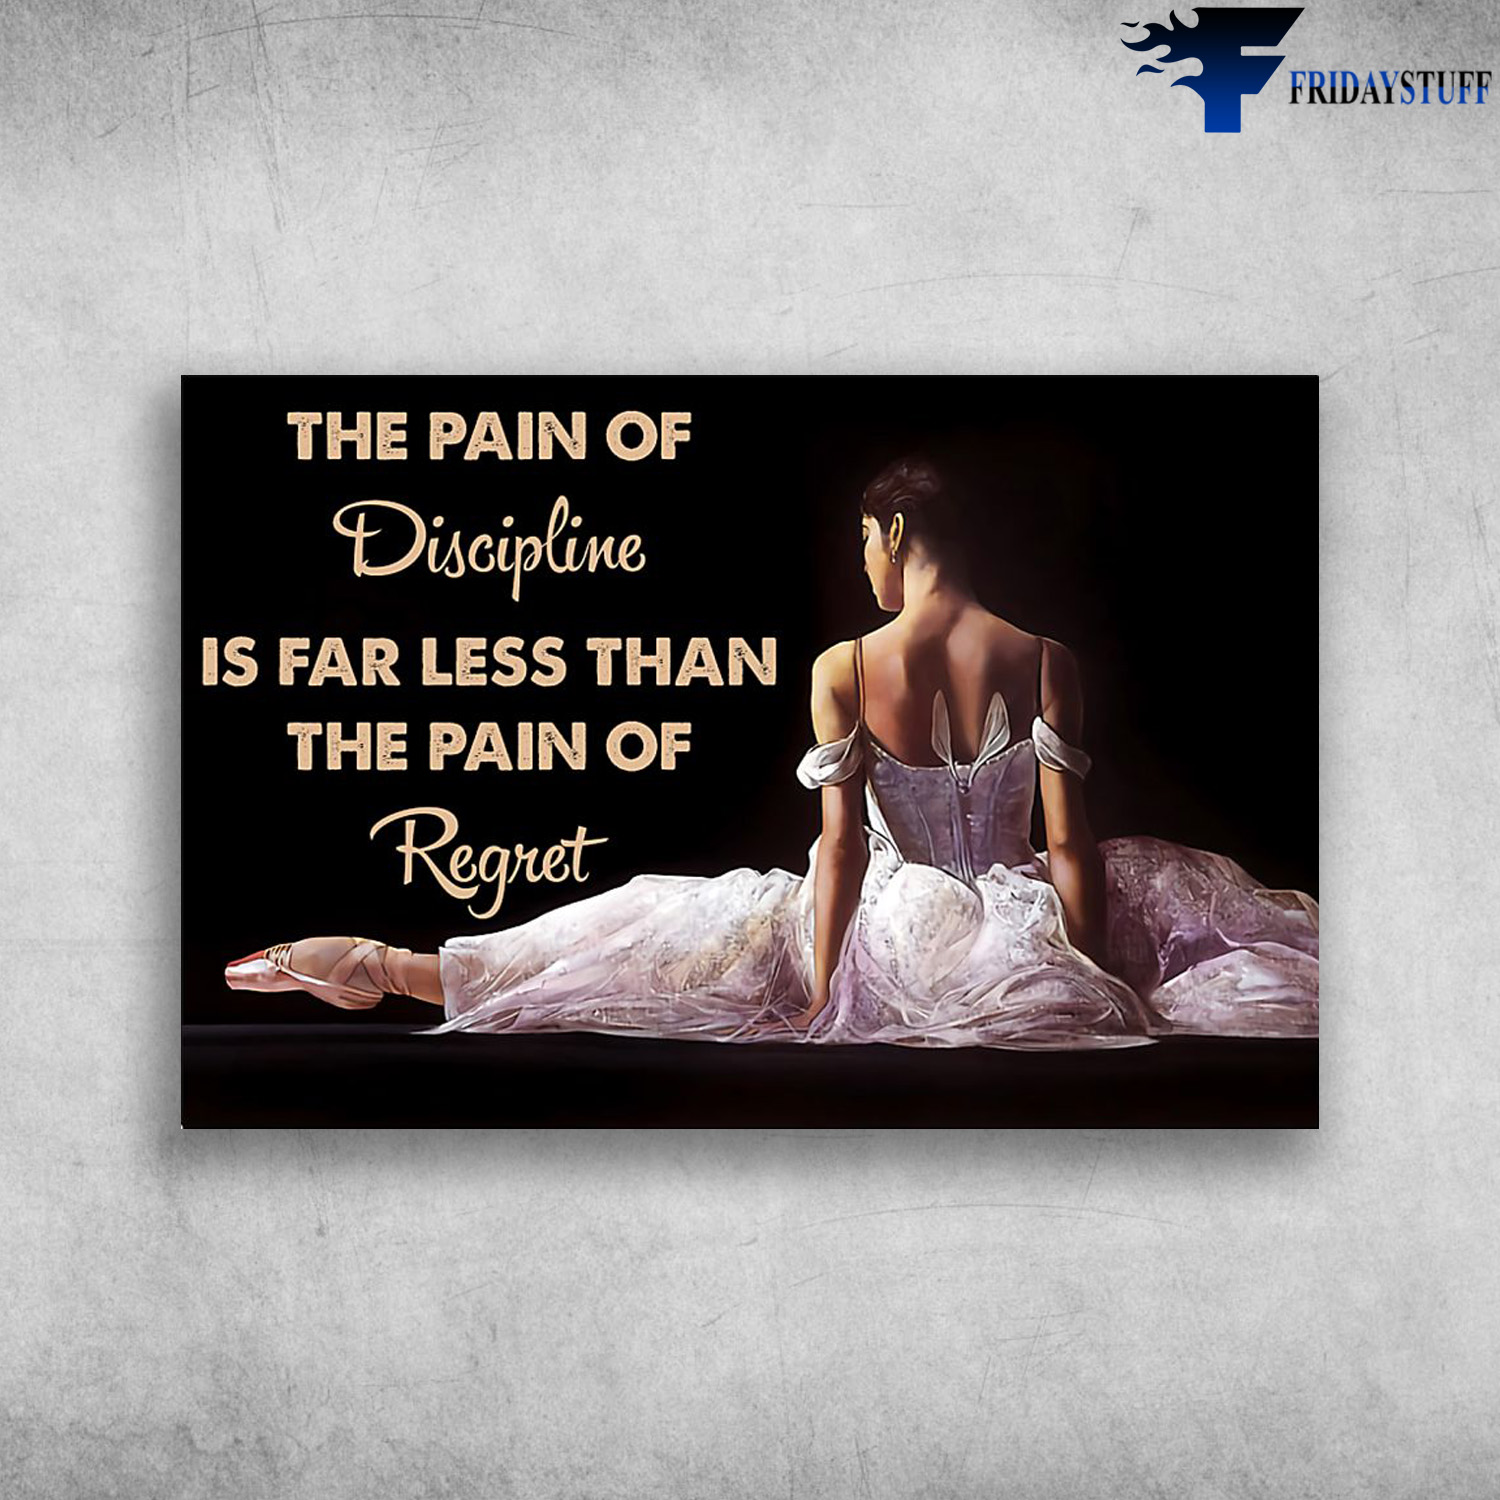 Ballet Dancer - The Pain Of Discipline Is Far Less Than The Pain Of Regret